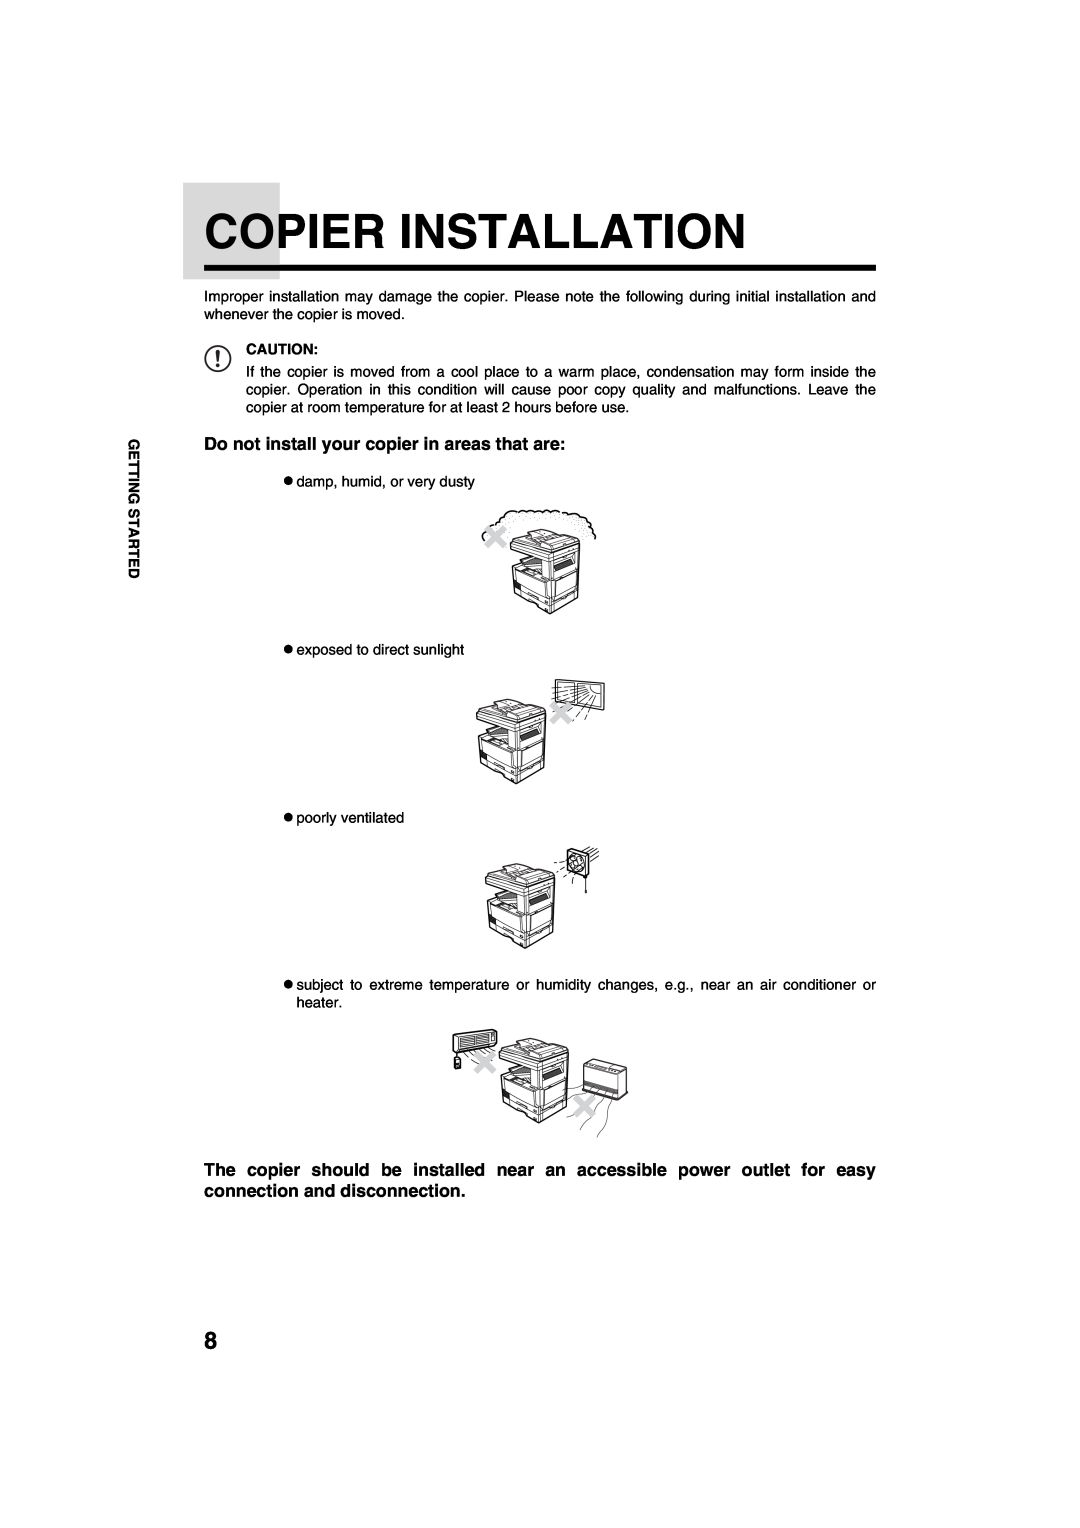 Sharp AR-M208 operation manual Copier Installation, Do not install your copier in areas that are 